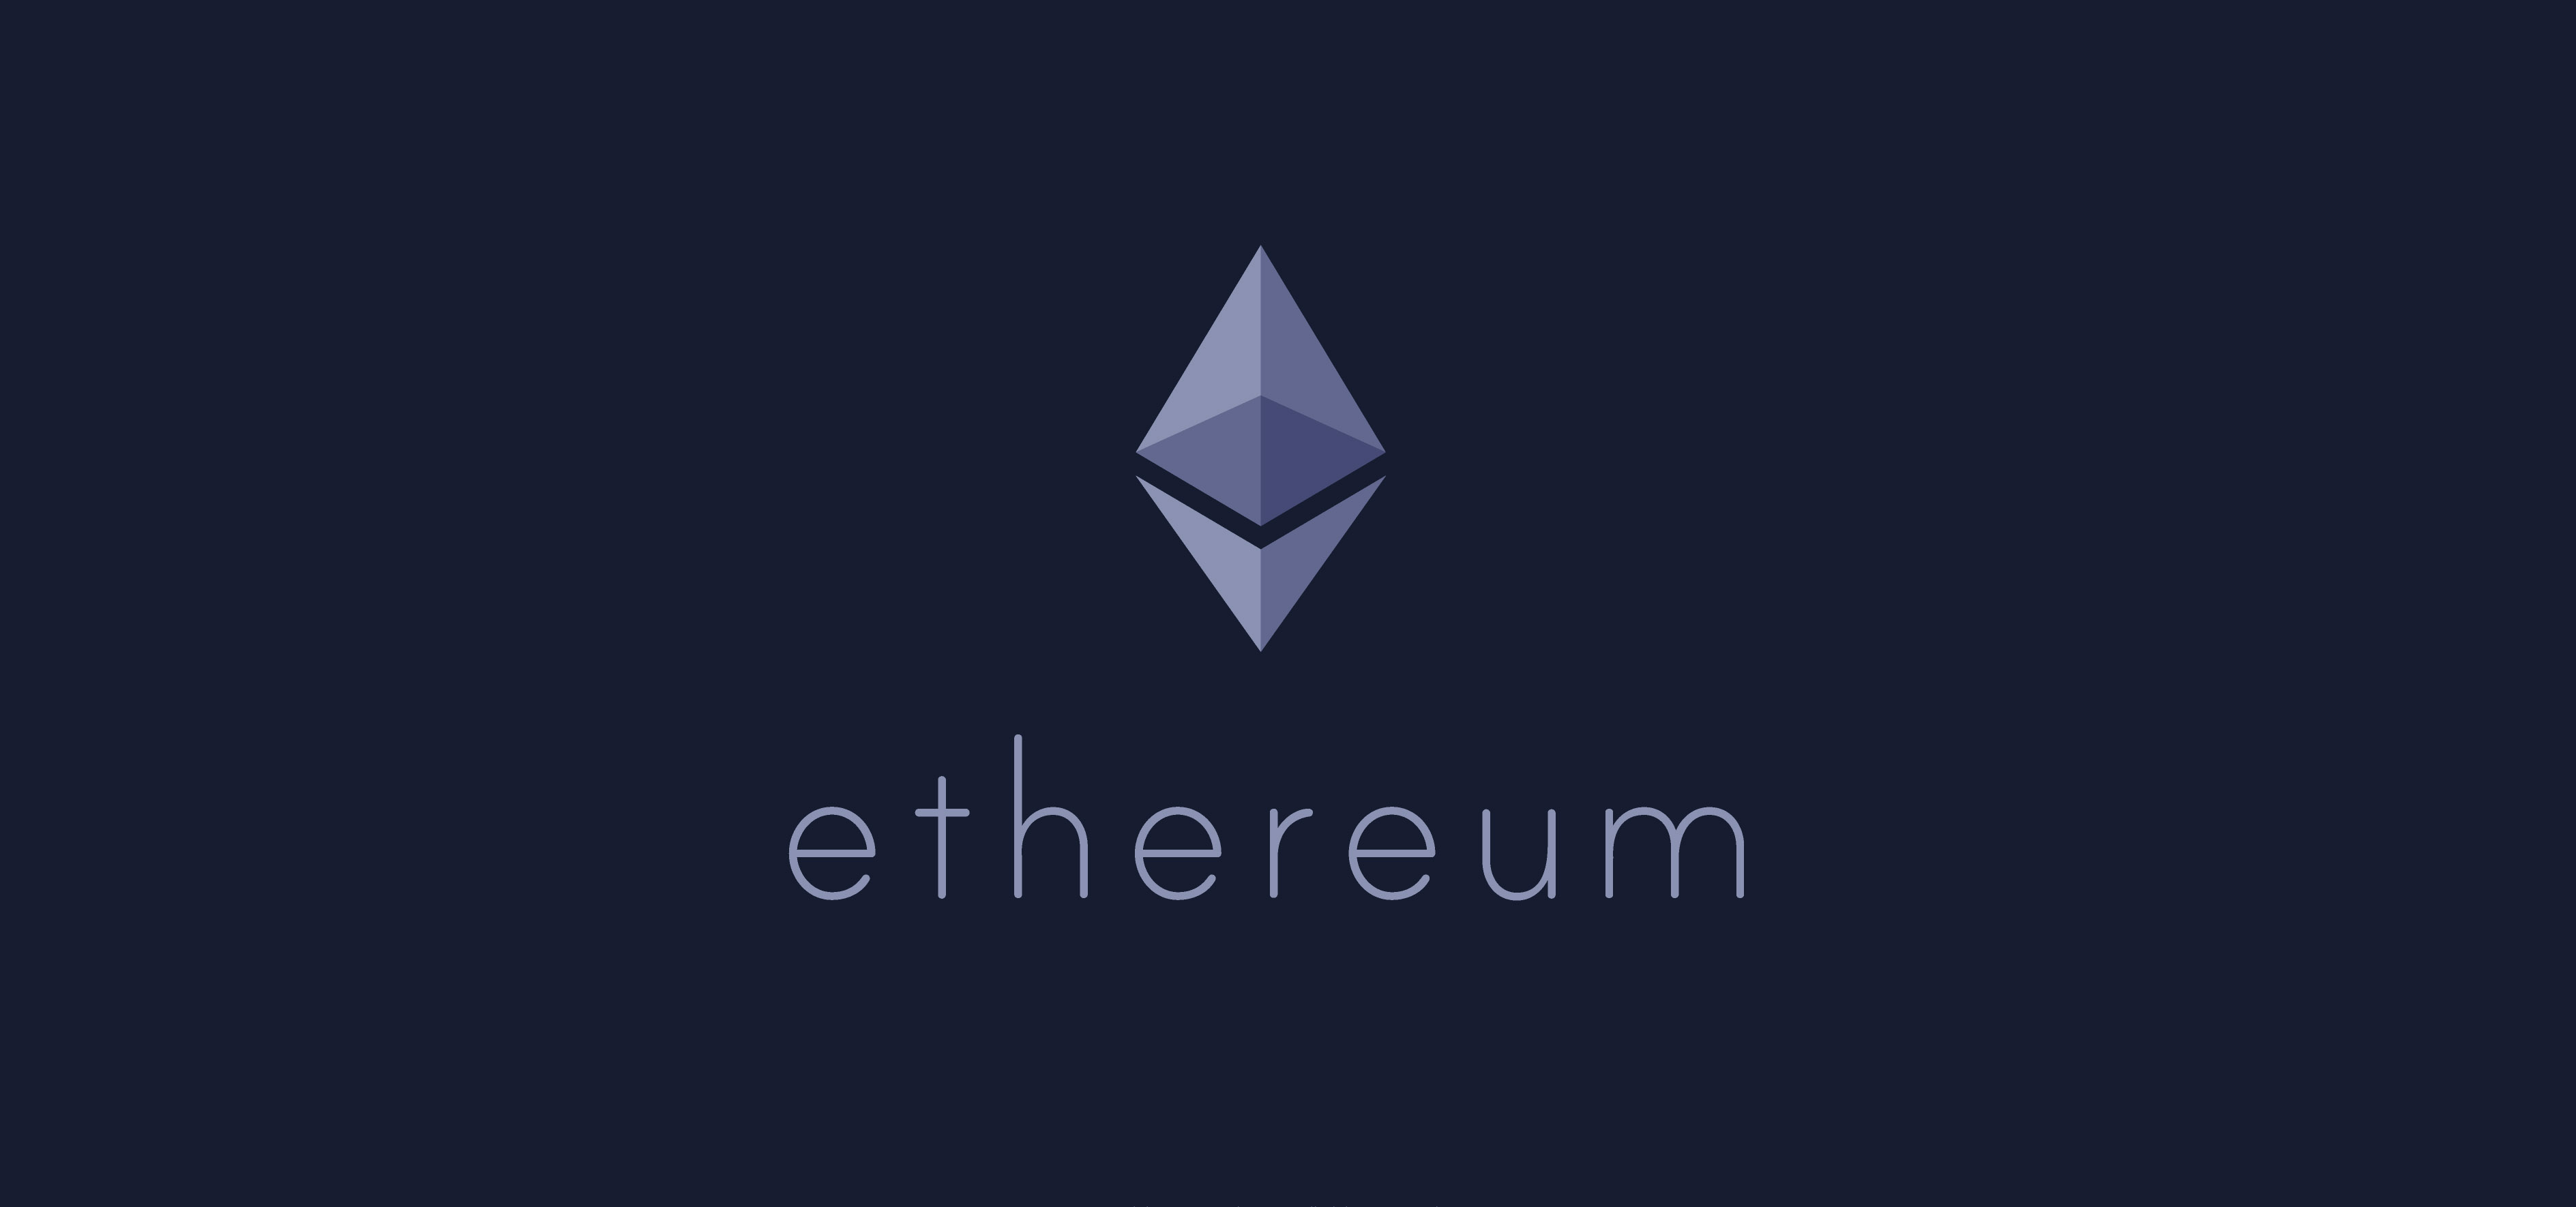 The initiative is the result of 18 months of collaboration between business leaders, technological developments and platforms within the technical committee of Enterprise Ethereum Alliance